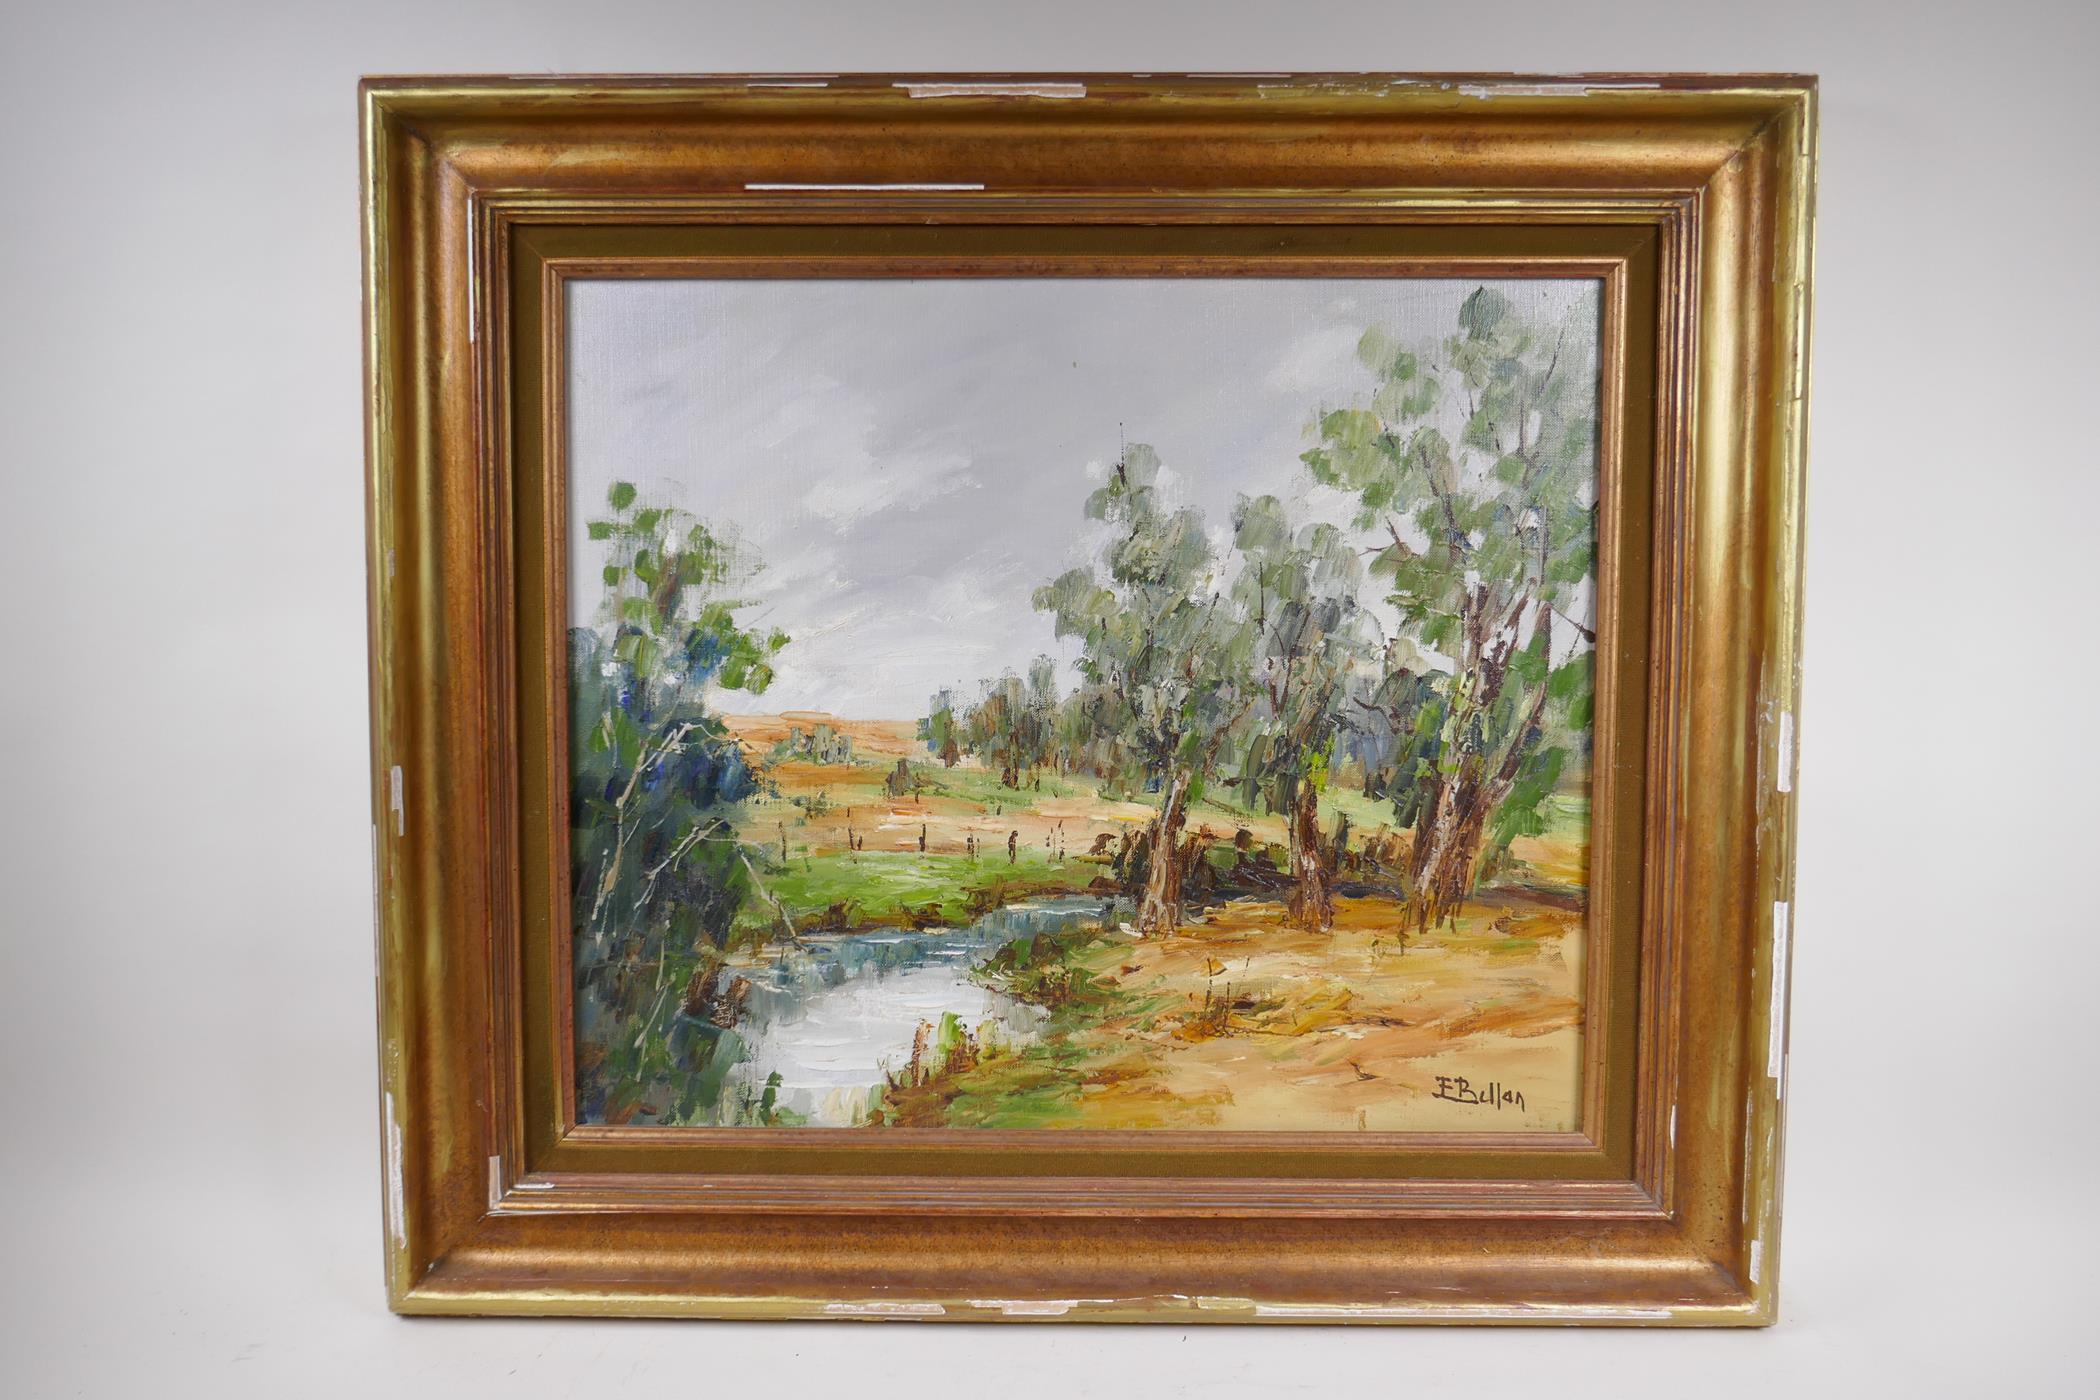 Etienne Bellan, (French, 1922-2000), landscape with a stream, possibly French Africa, 55cm x 46cm - Image 2 of 3